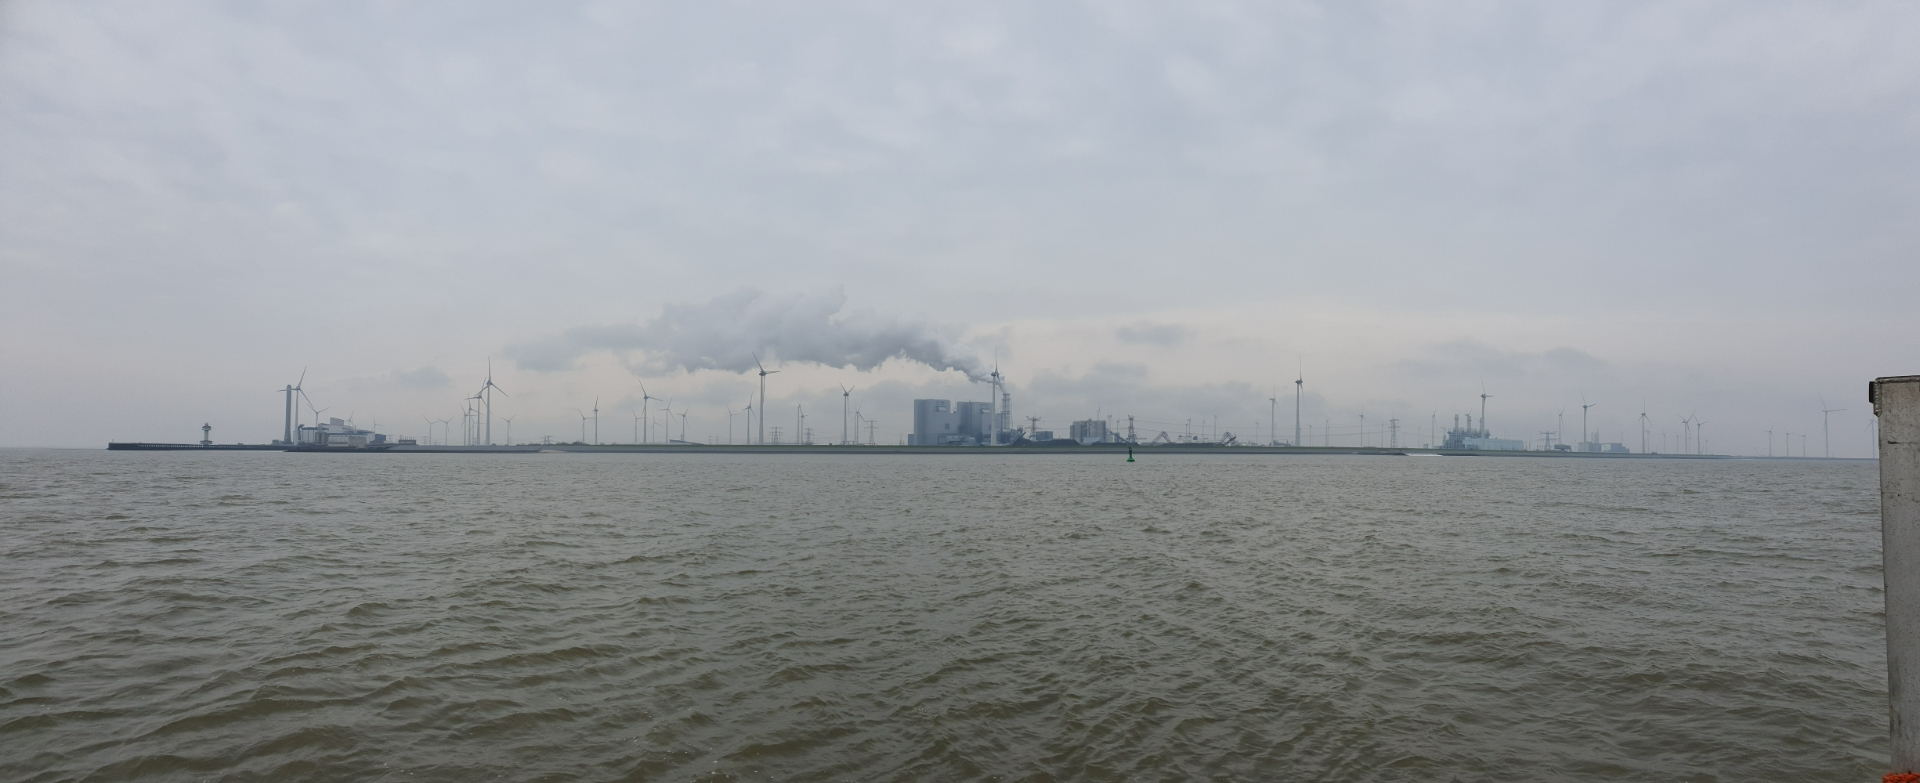 View of Eemshavens industry from the Wadden Sea.